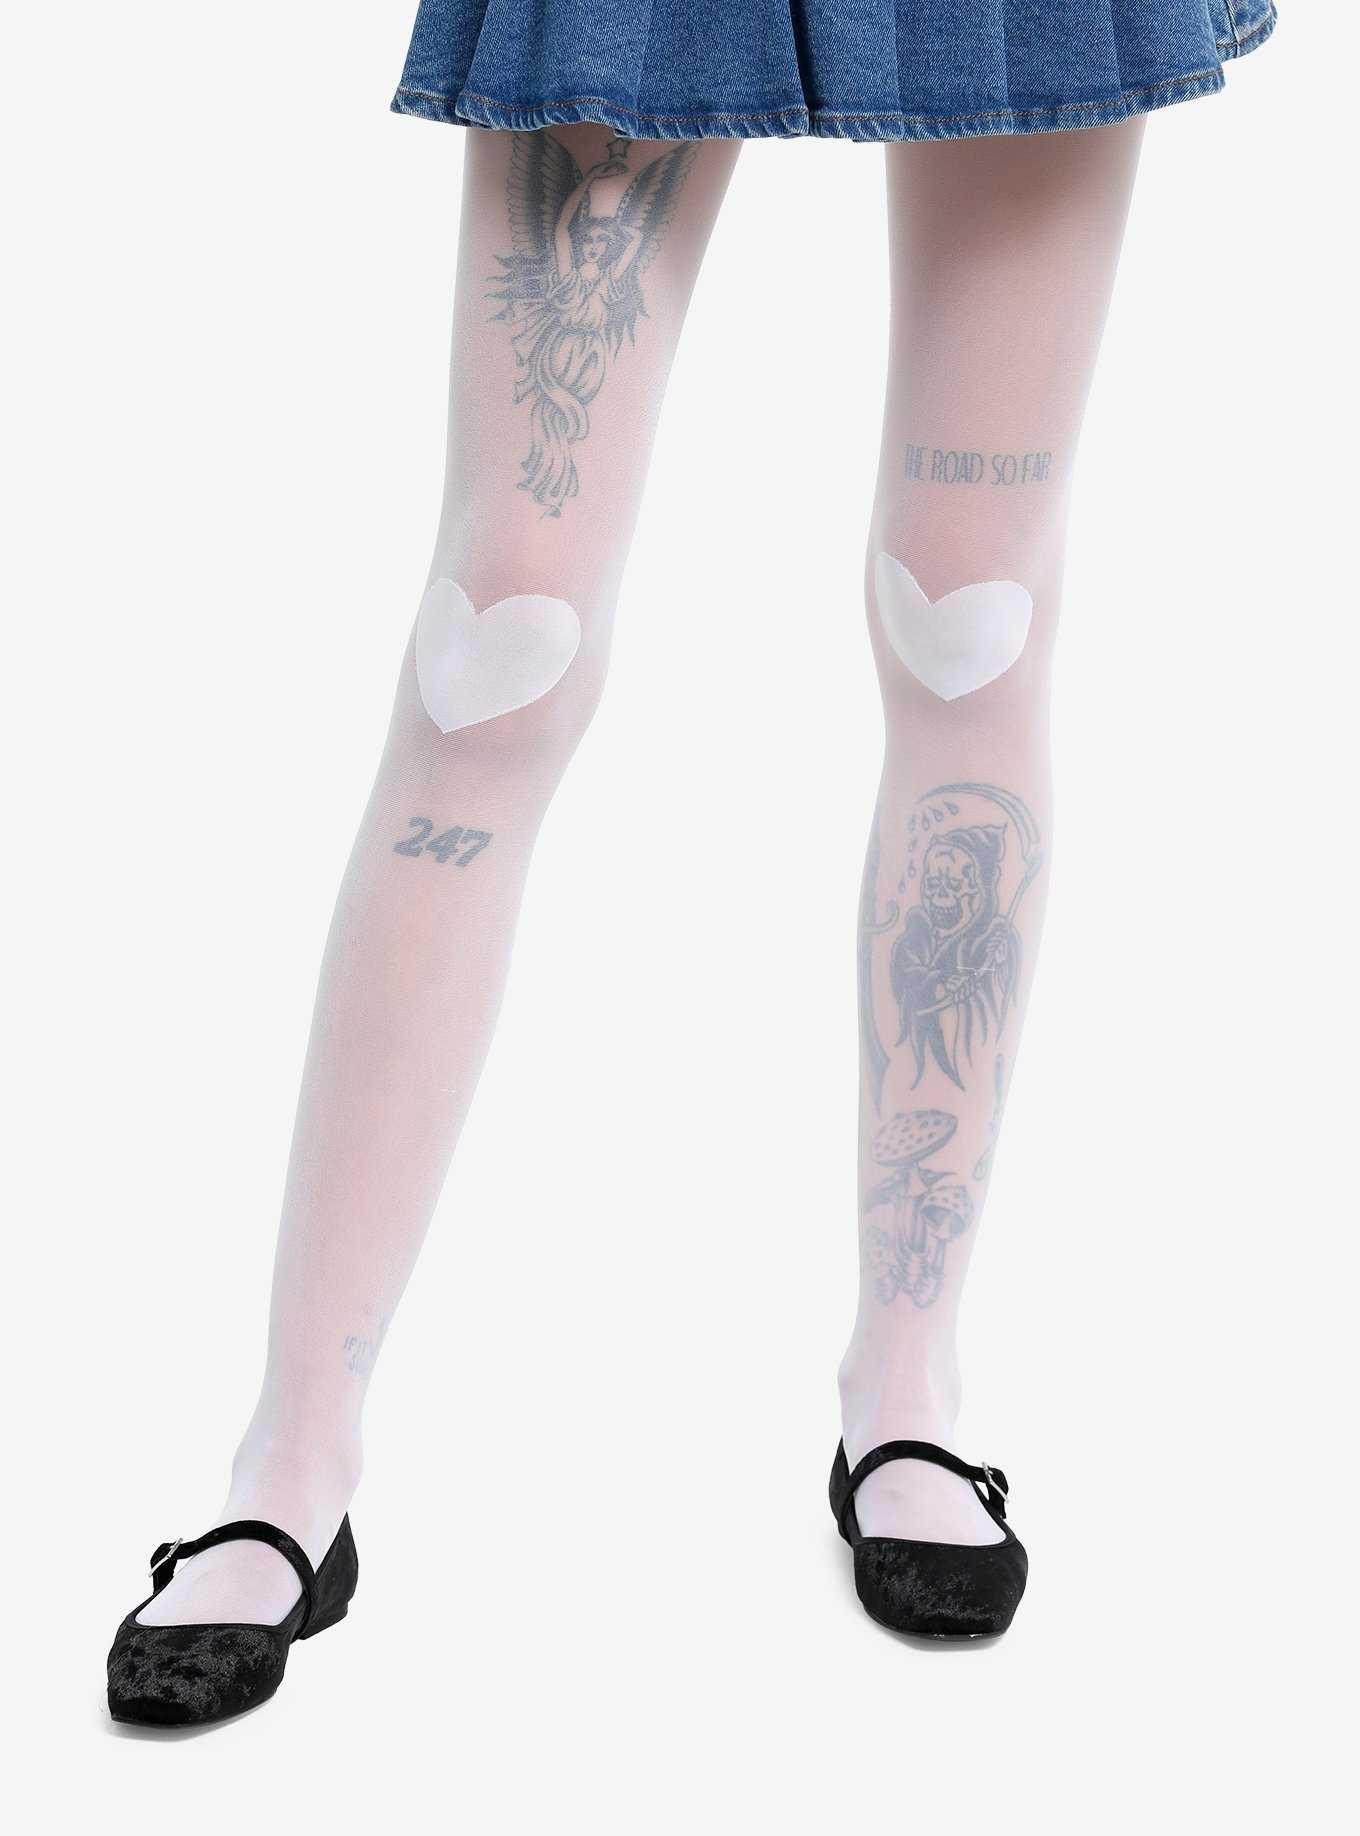 Hot Topic Black Heart White Fishnet Tights One Size Fits Most #45974